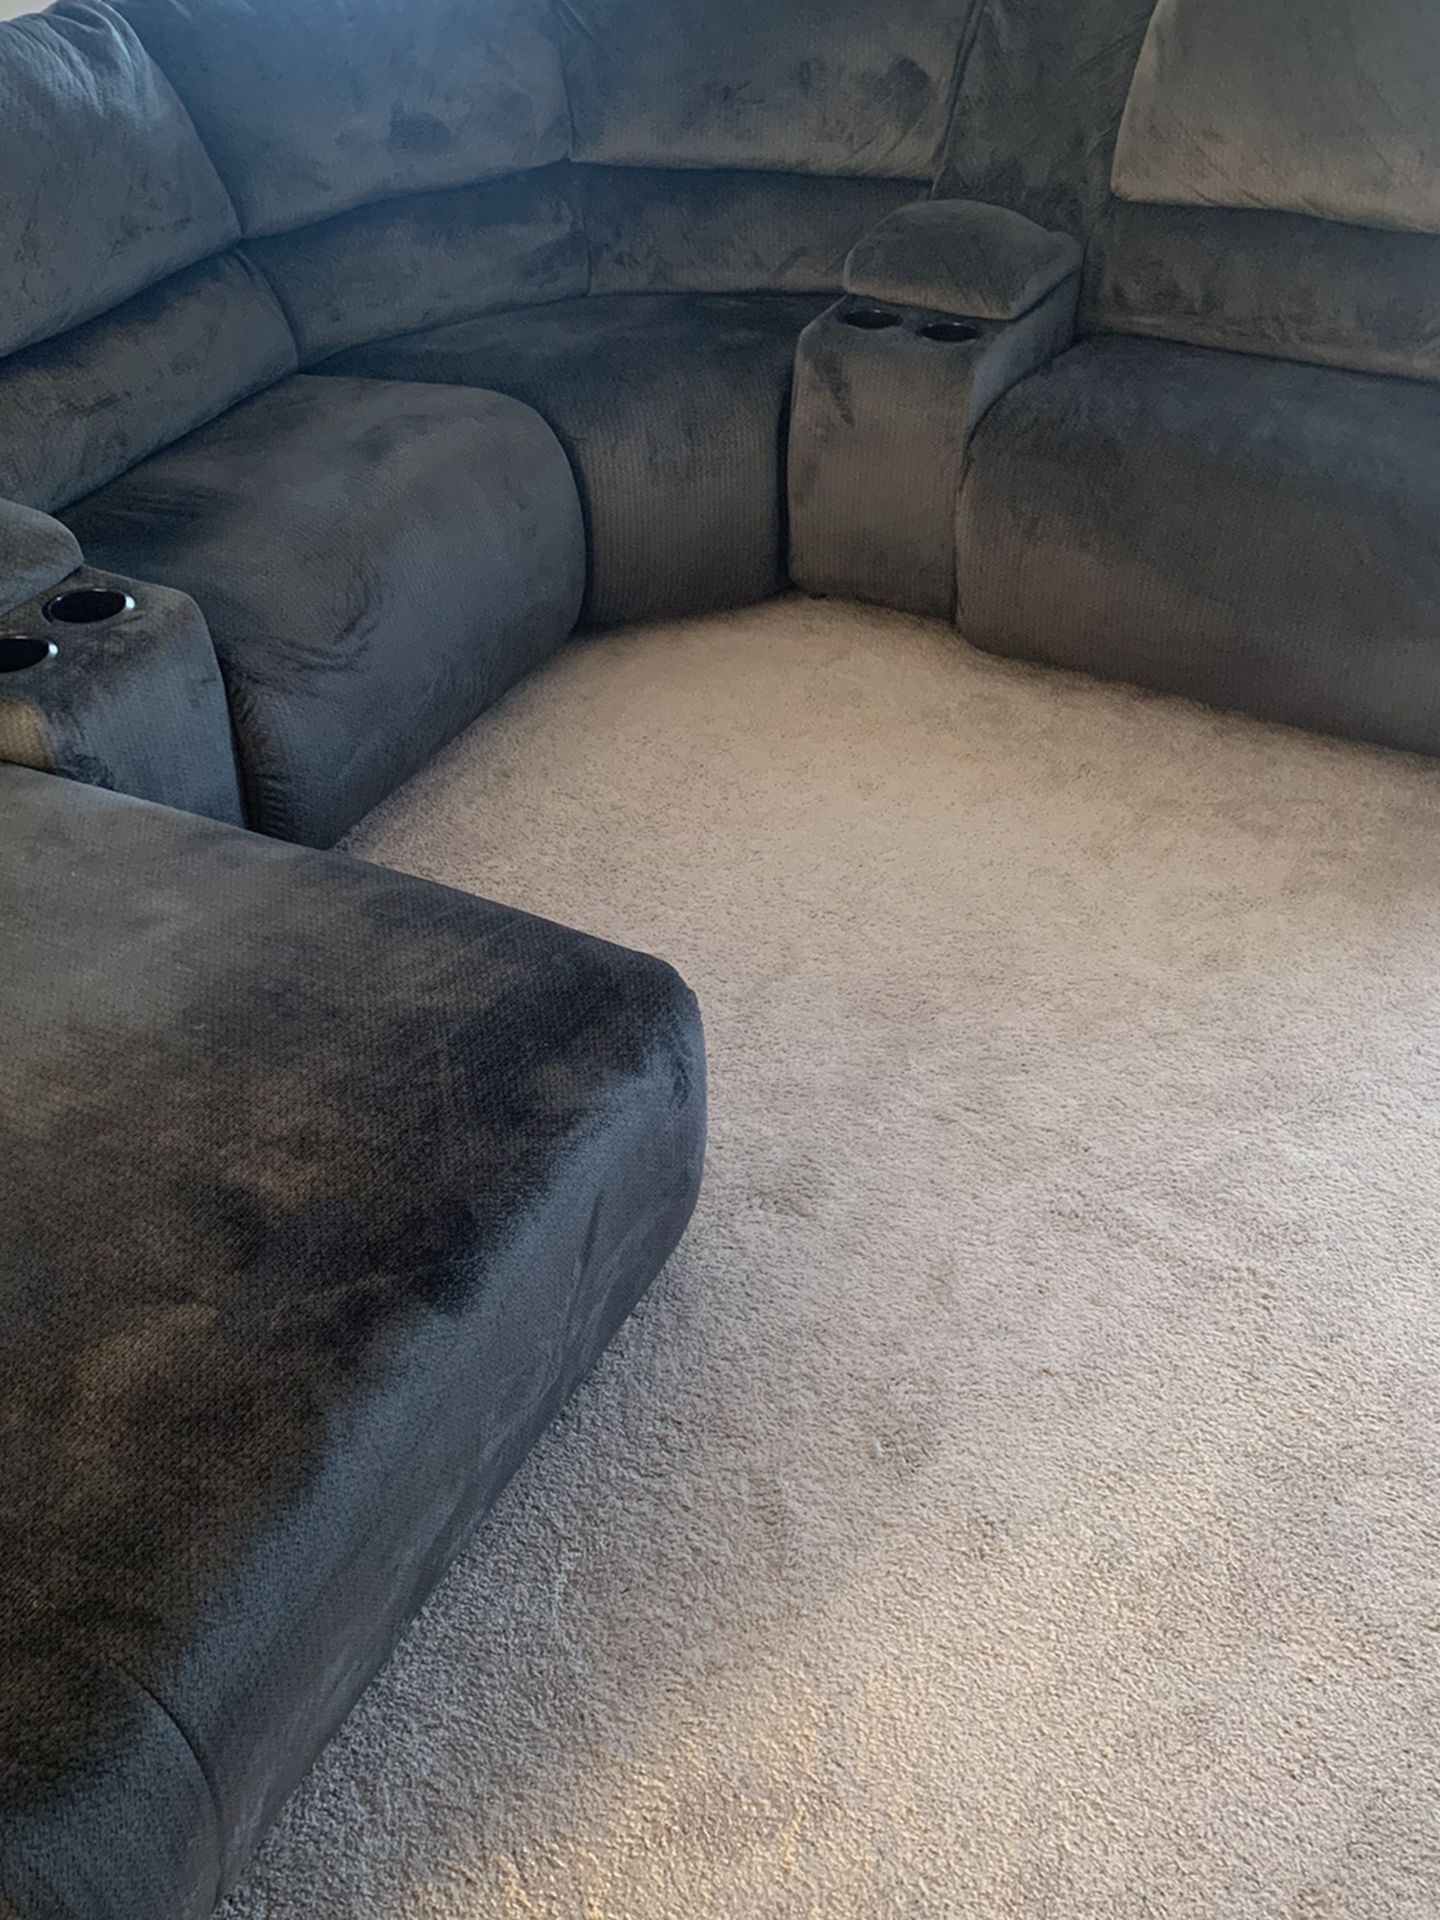 6 Piece Sectional Couch